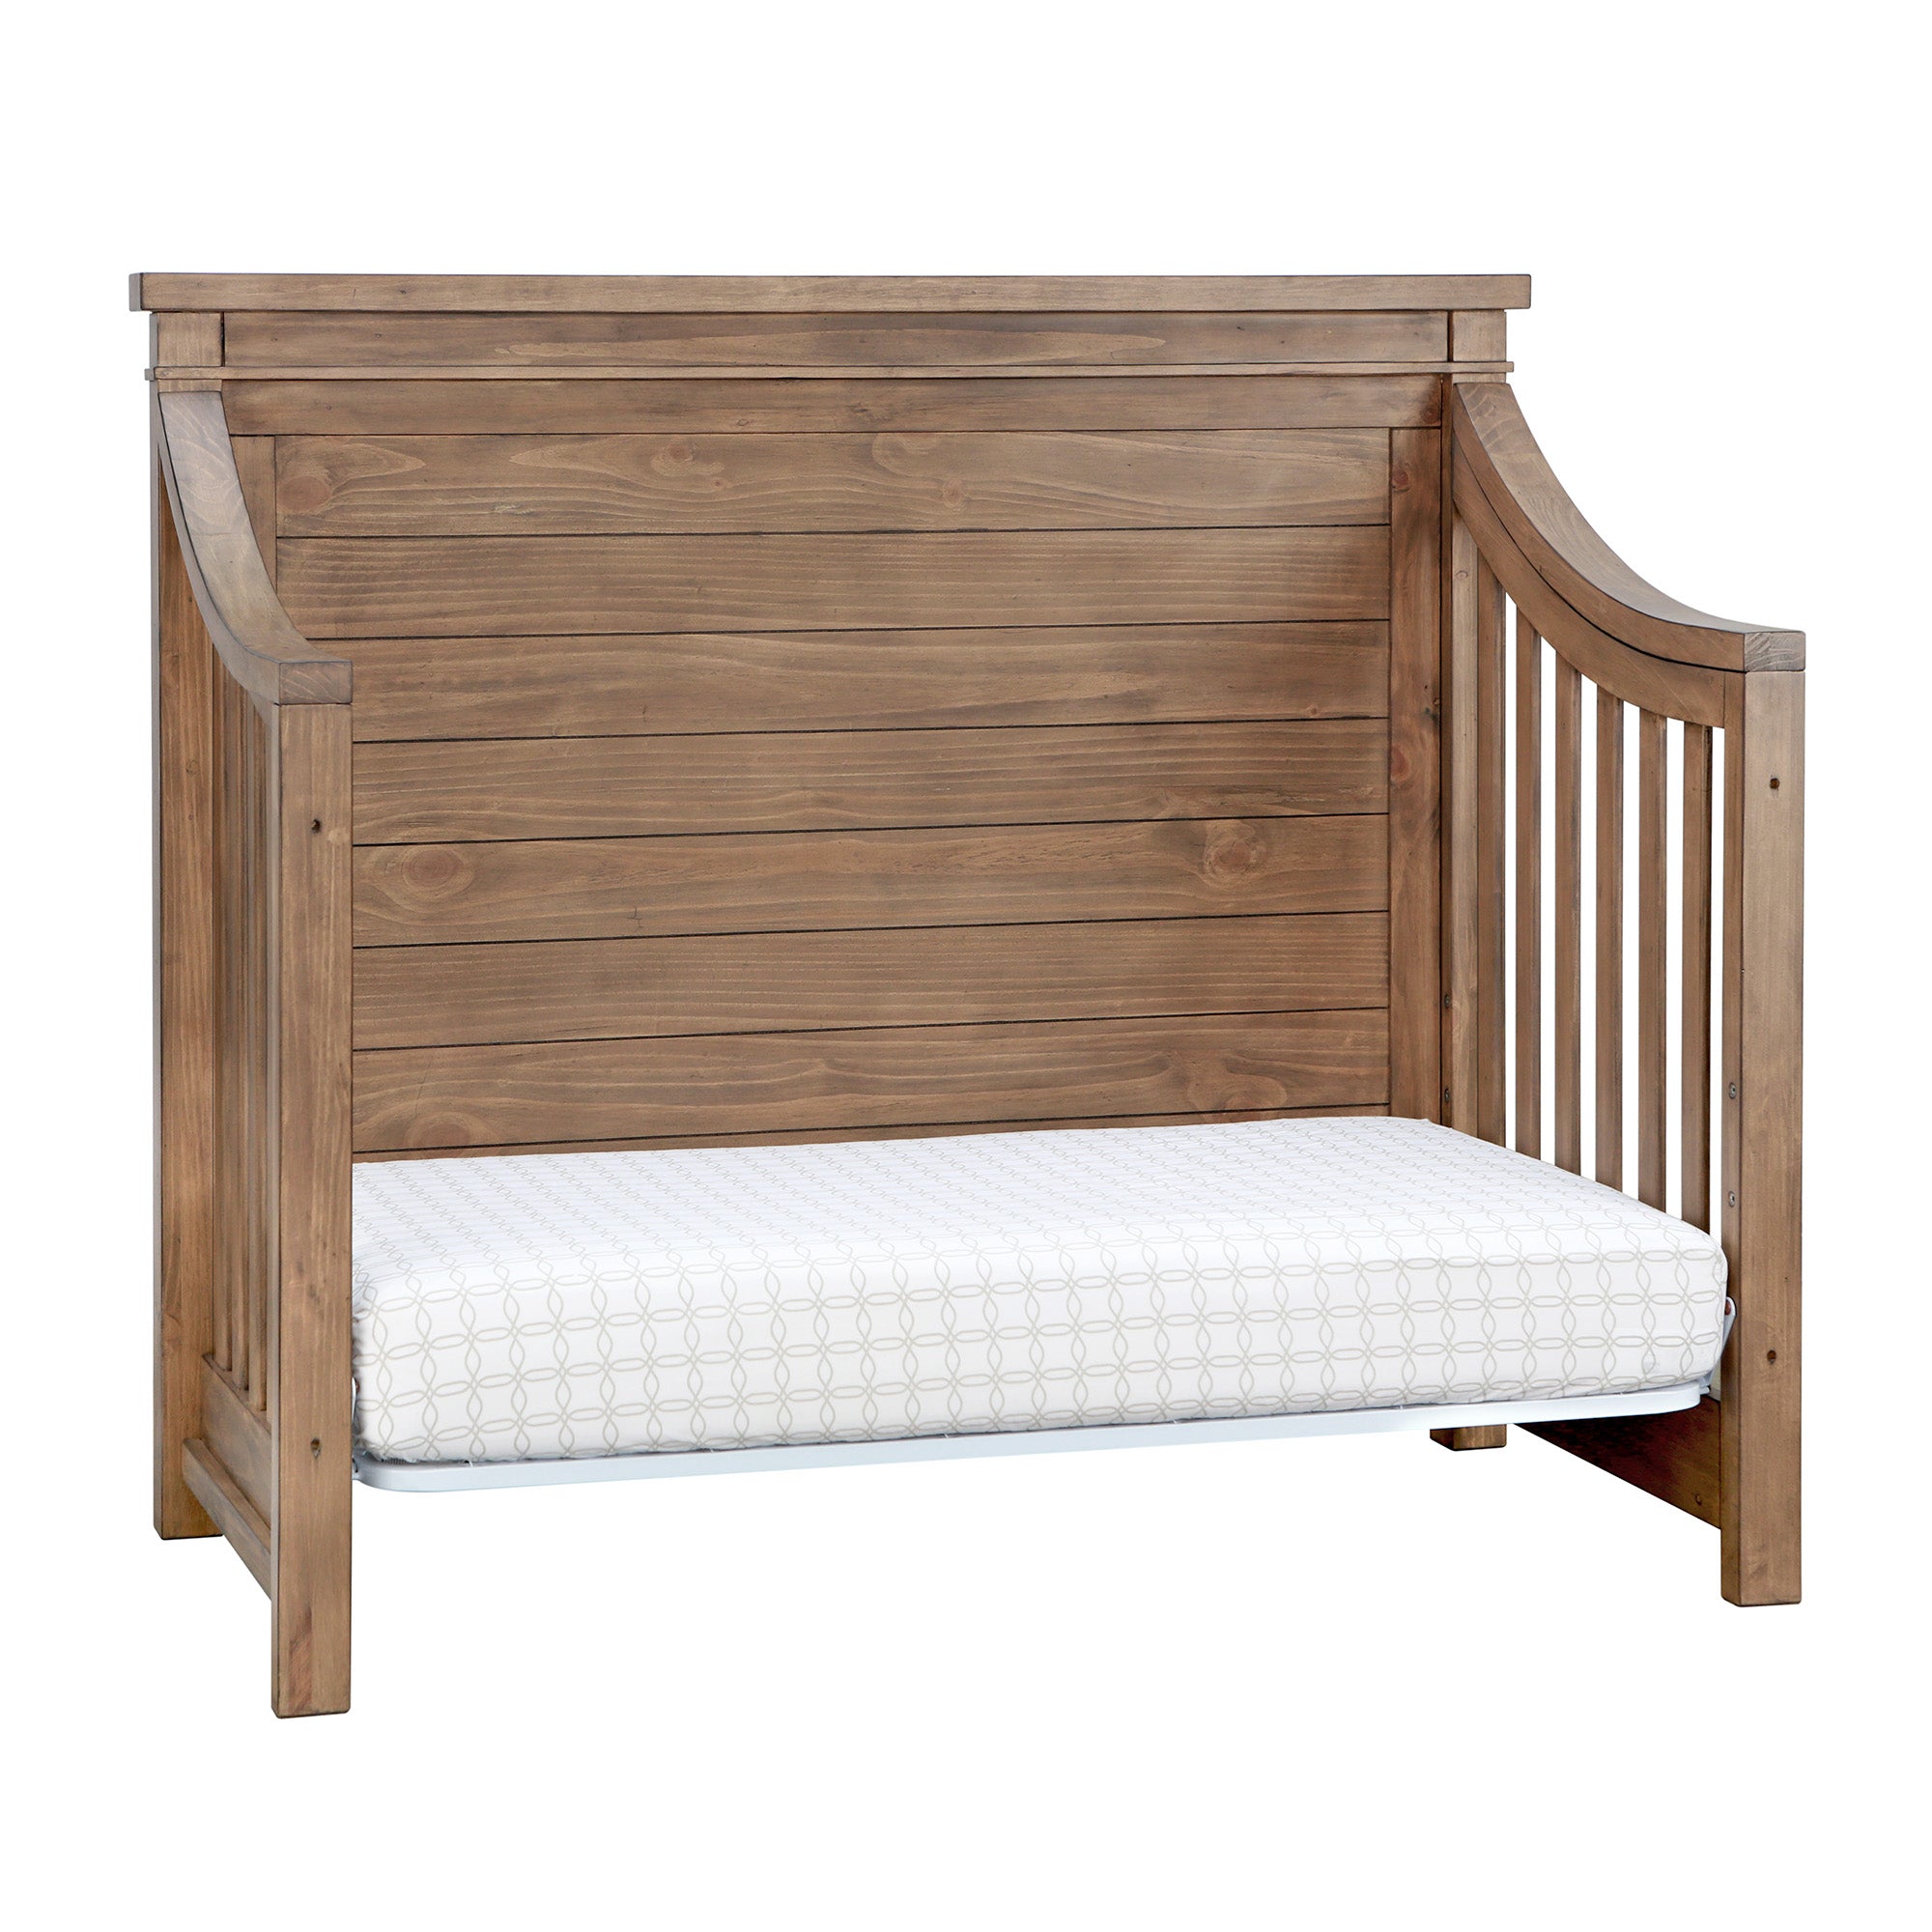 Rowan crib shown converted to daybed